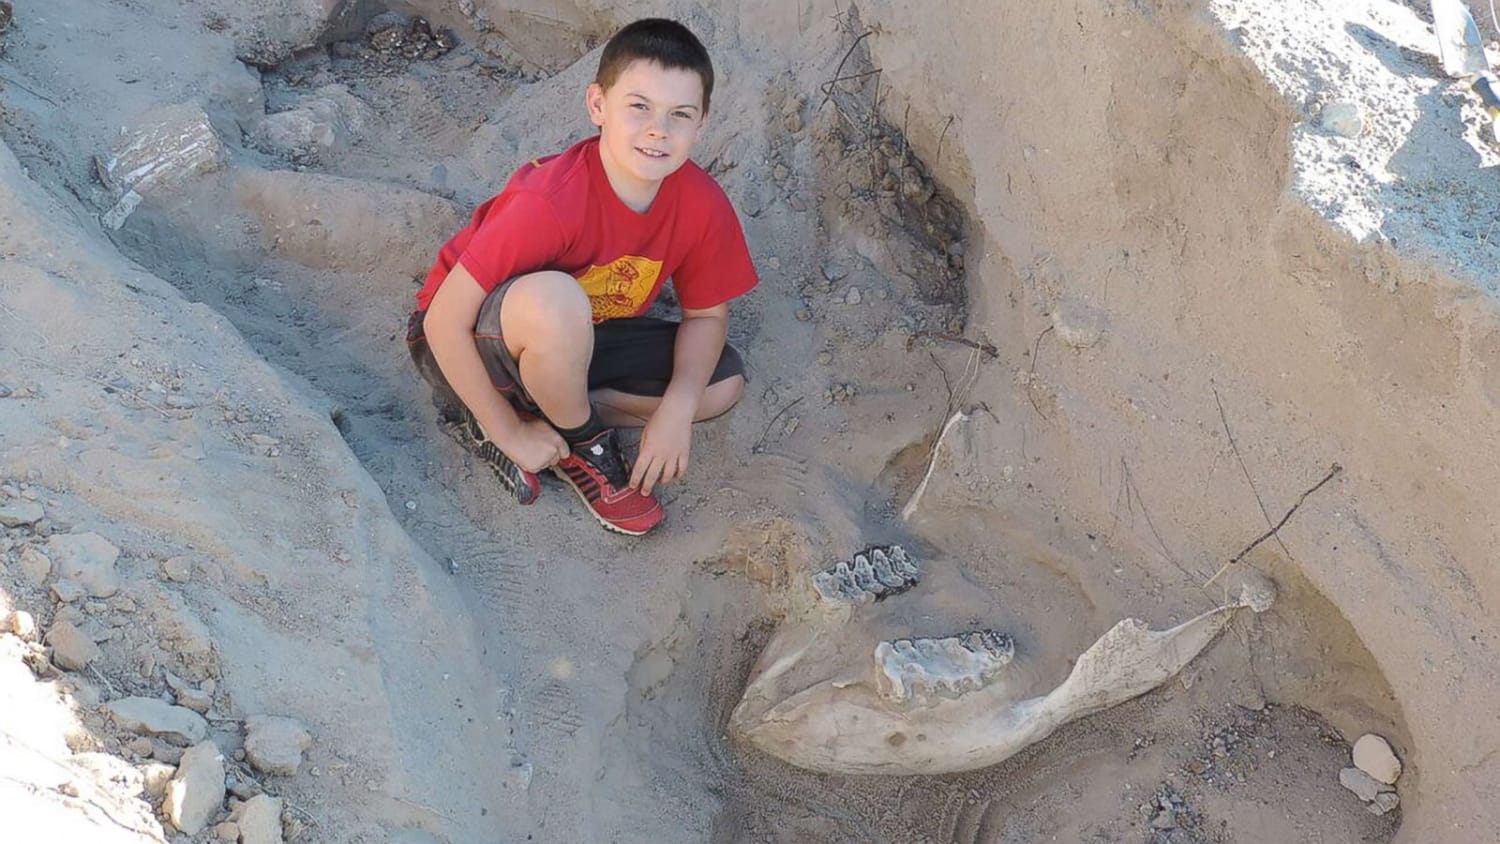 Ten year old trips over what he thought was a cow skull, but it turned out to be a Stegomastodon fossil, 1.2 million years old. The New Mexico site was later excavated revealing more parts of the skeleton.